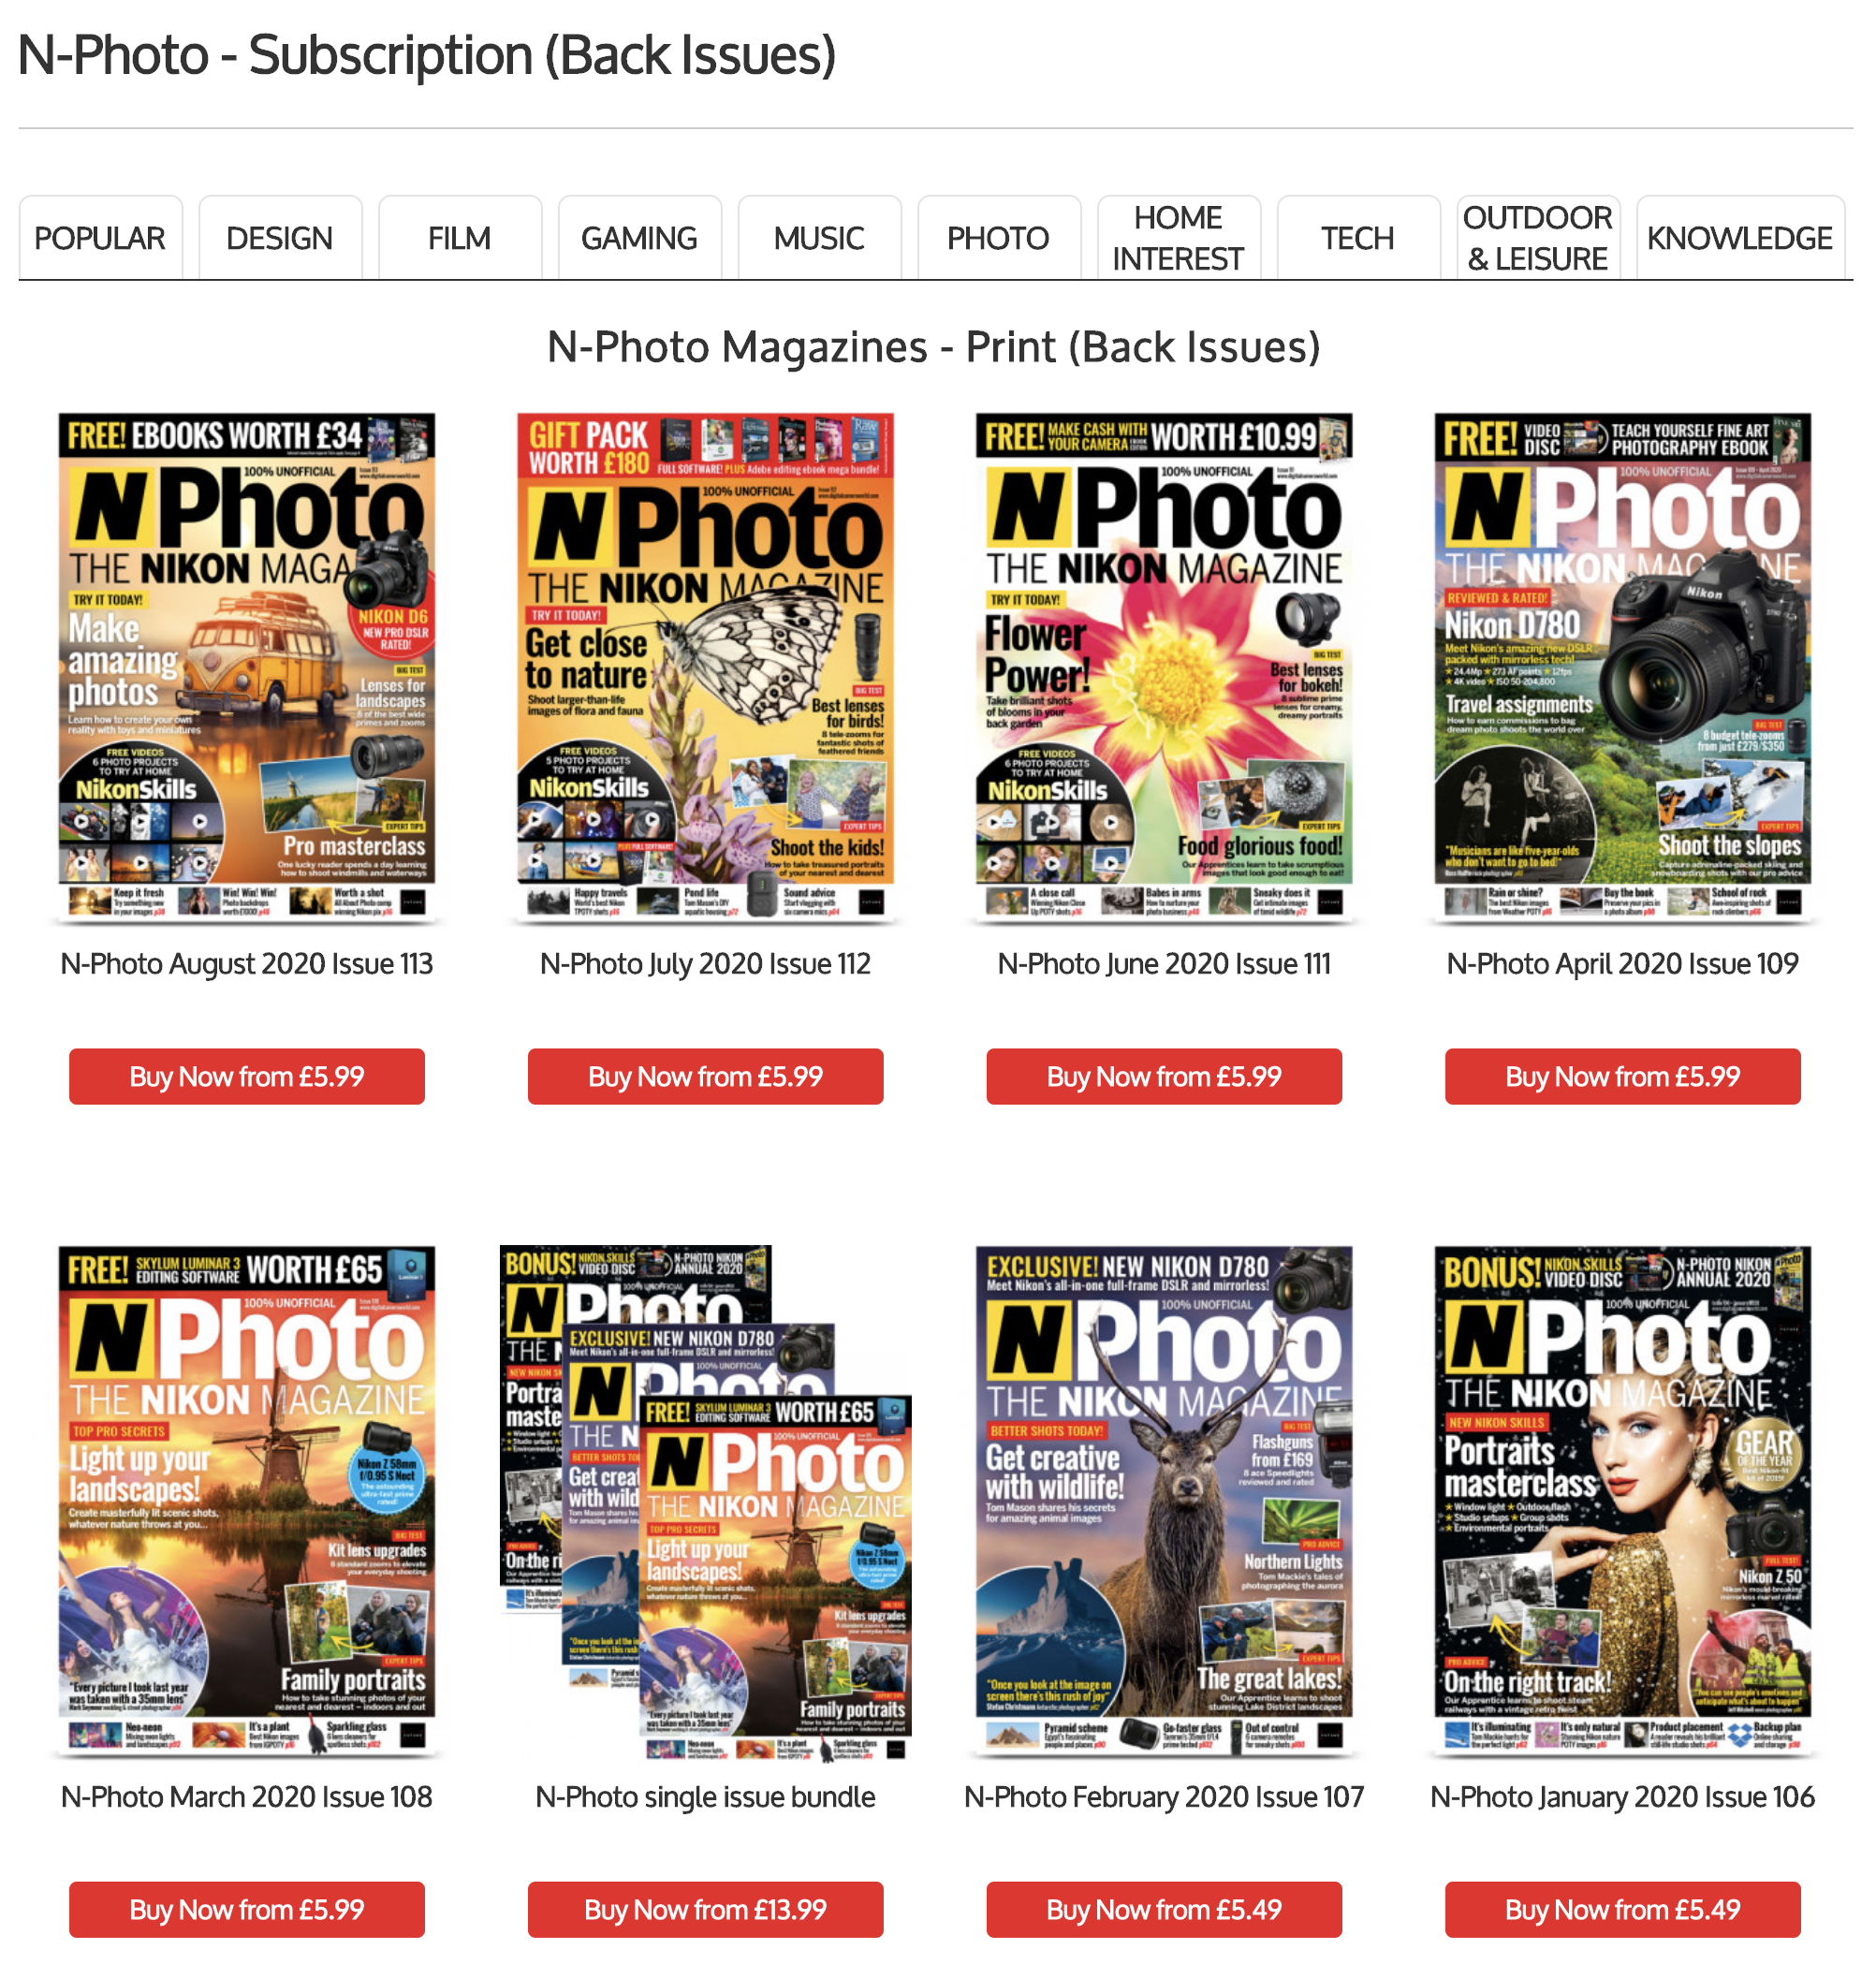 Back issues of N-Photo are available online